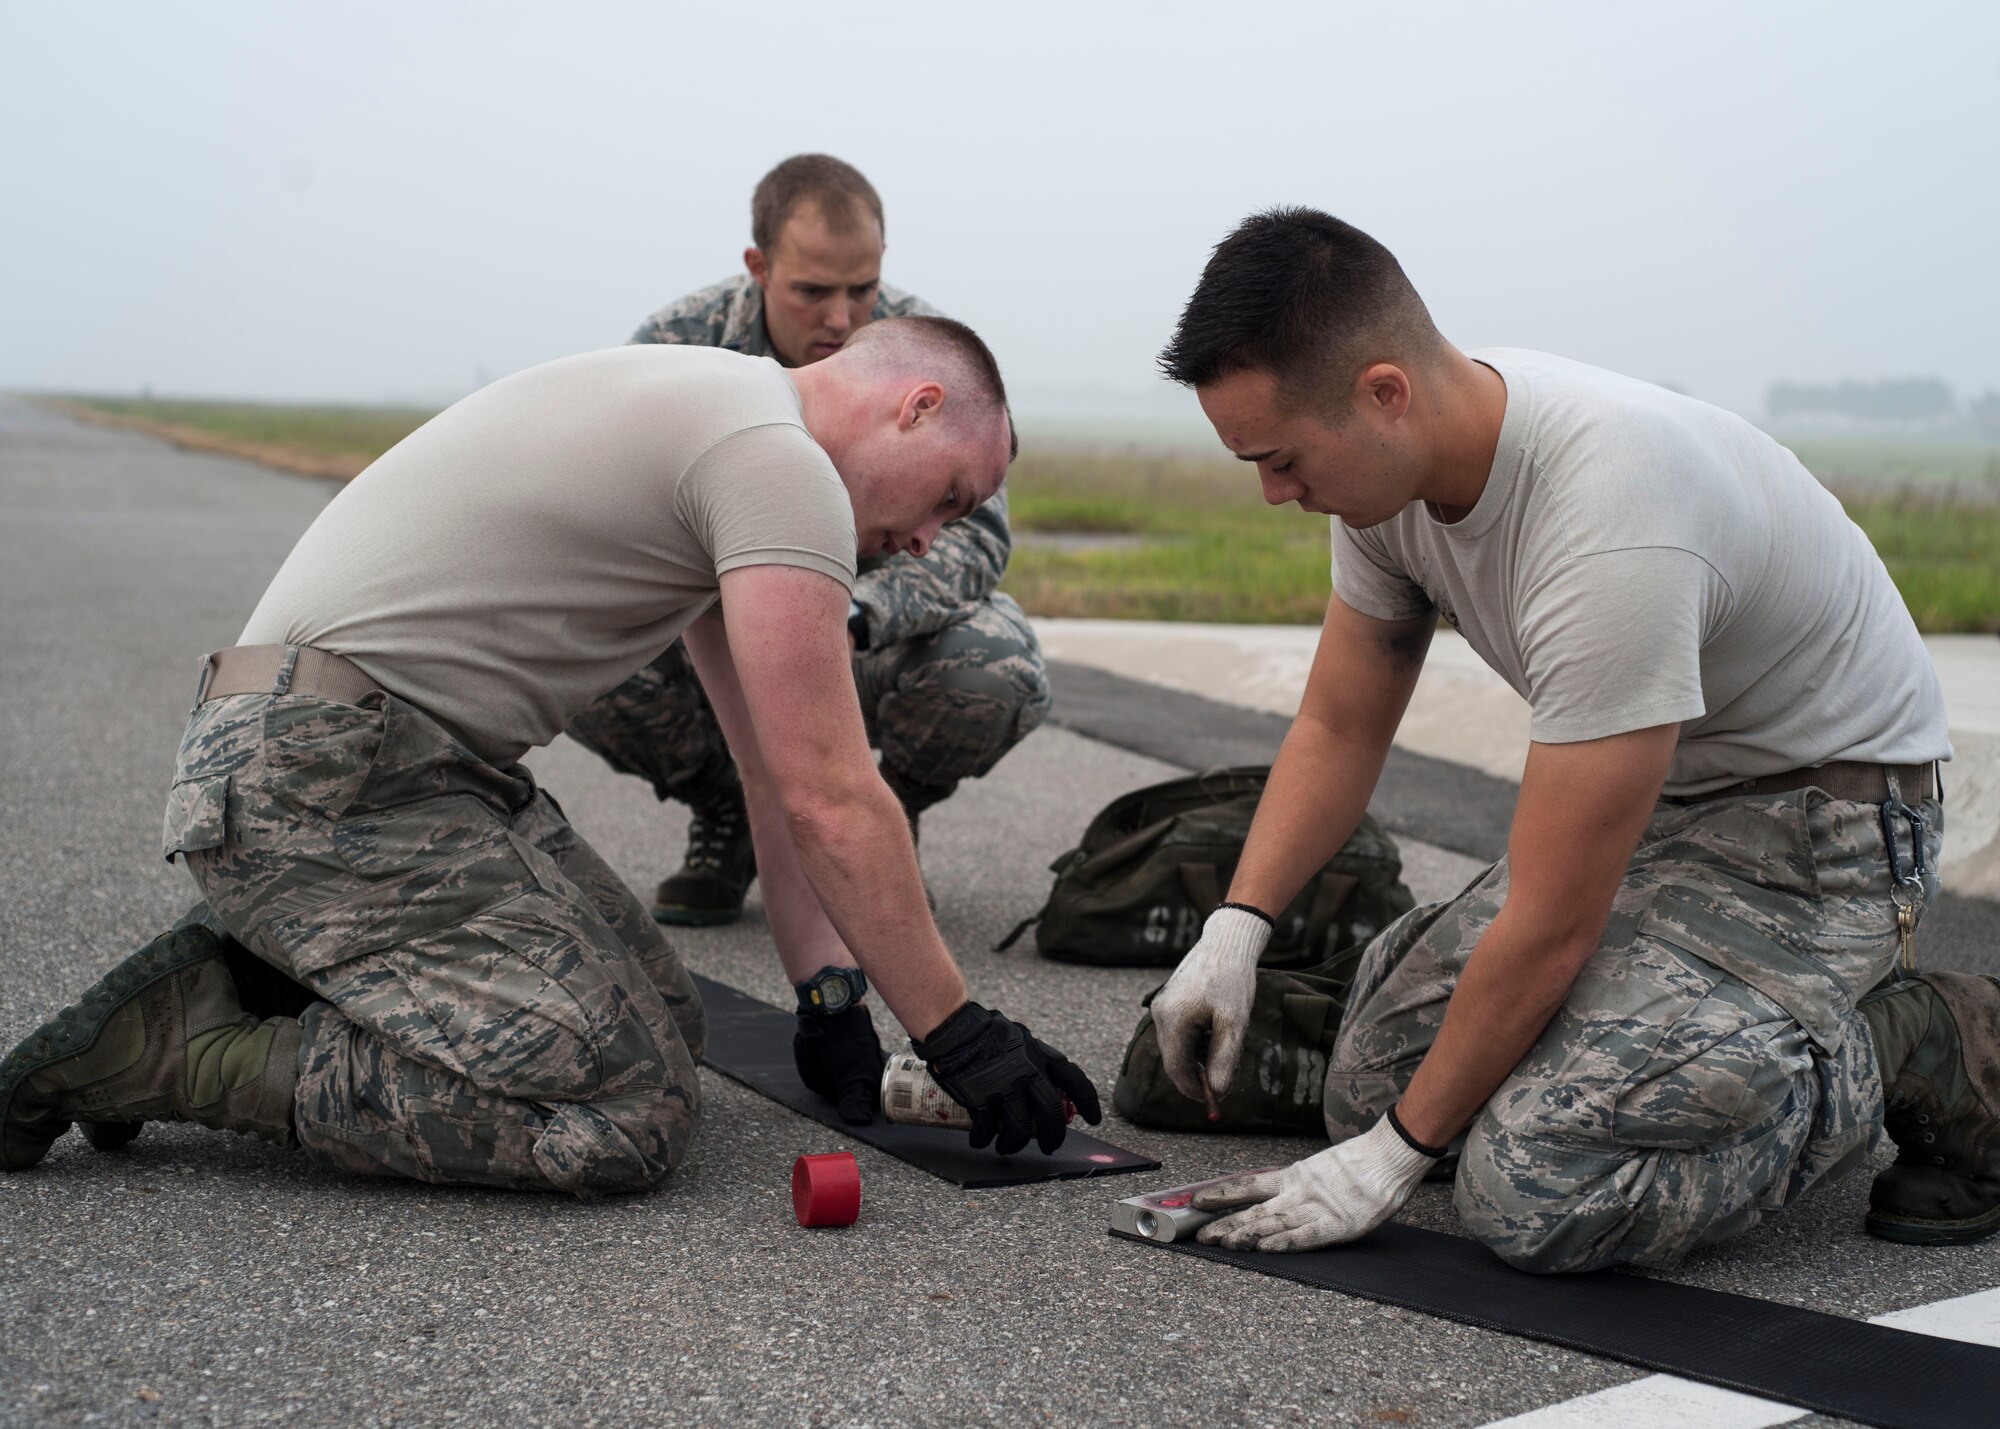 U.S. Air Force Airmen assigned to the 8th Civil Engineer Squadron replace the old end of the nylon tape used for the aircraft arresting system at Kunsan Air Base, Republic of Korea, Sept. 9, 2017. The system includes a 1.25-inch steel cable attached to 1,200 feet of the nylon tape wrapped in a large metal reel.  When activated, the reel spins and activates a hydraulic pump which compresses brake pads. Safely bringing the aircraft to a halt in a controlled fashion. (U.S. Air Force photo by Staff Sgt. Victoria H. Taylor)